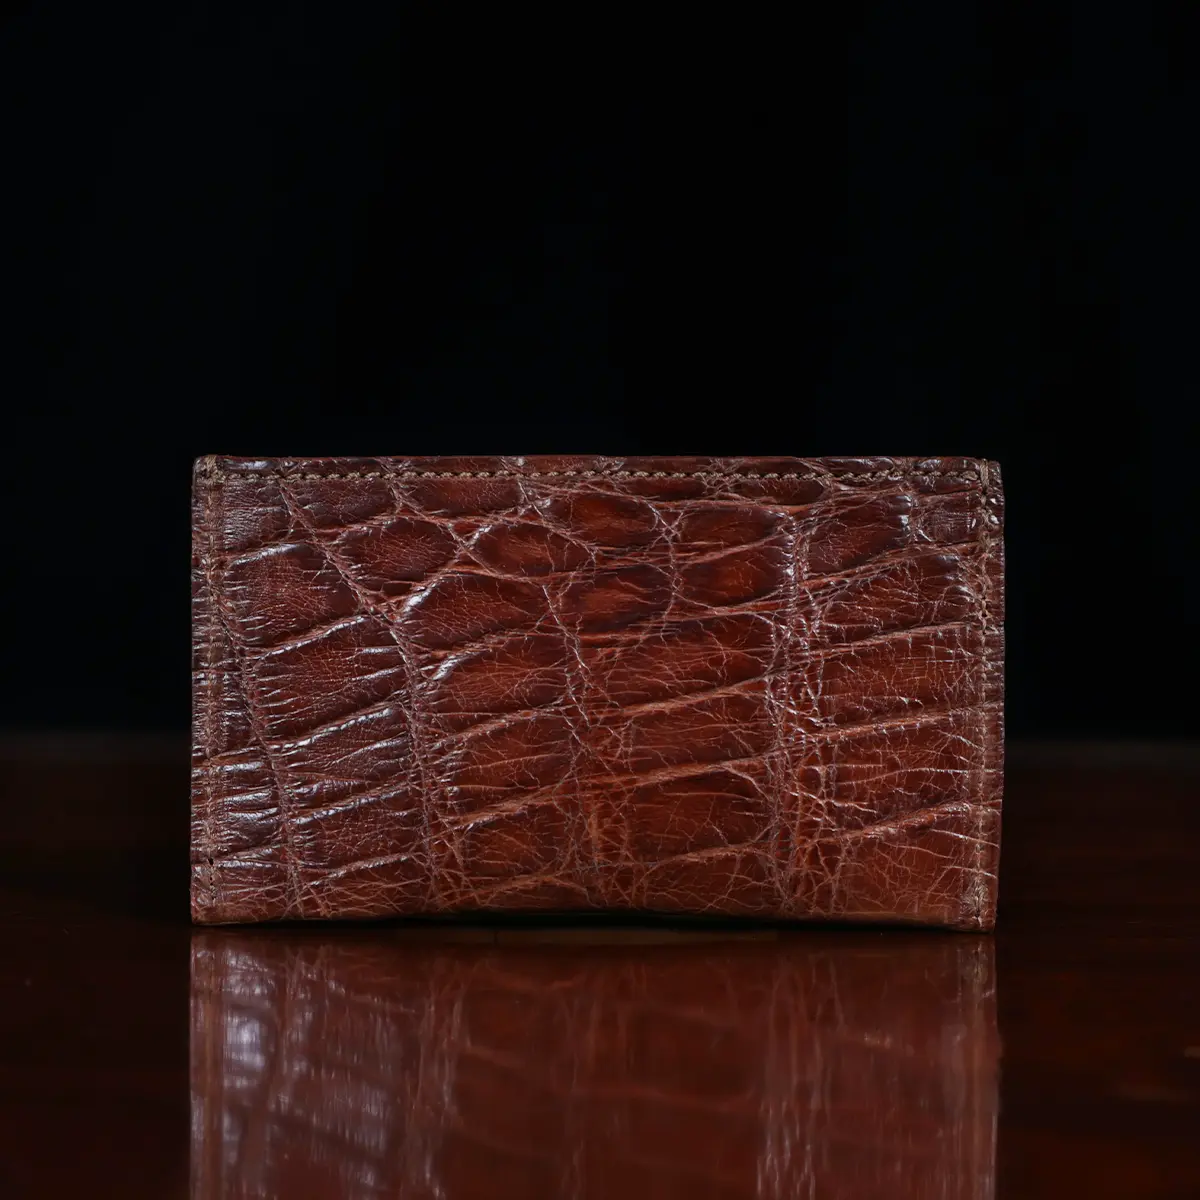 No. 3 Card Wallet in Vintage Brown American Alligator - ID 003 - front view with business card cut out on No. 2 Card Wallet in Vintage Brown American Alligator - ID 003 - back view on a black background